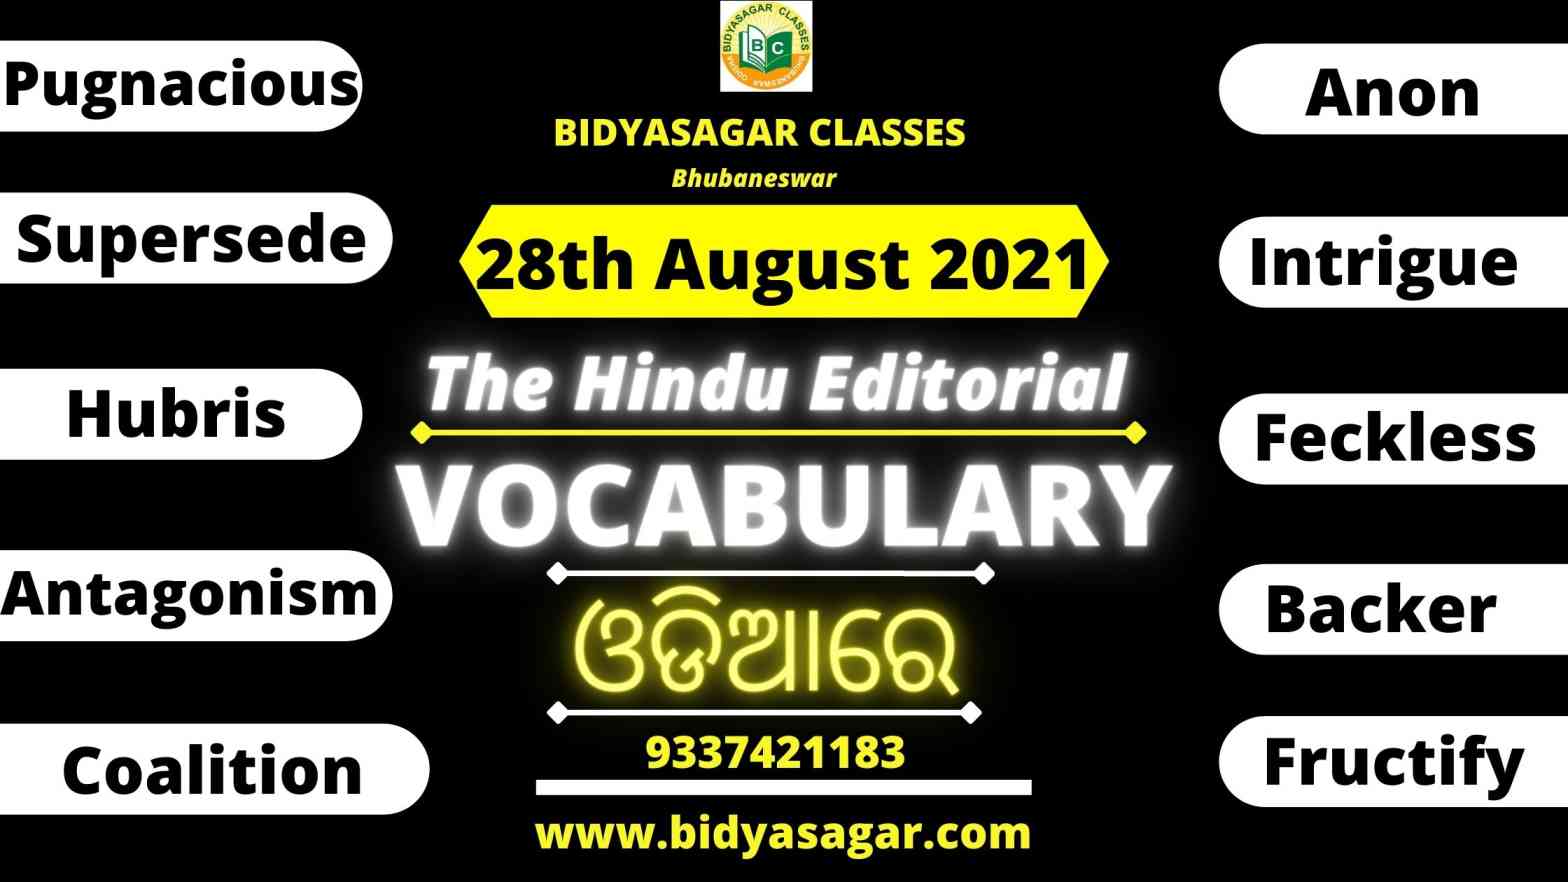 The Hindu Editorial Vocabulary of 28th August 2021